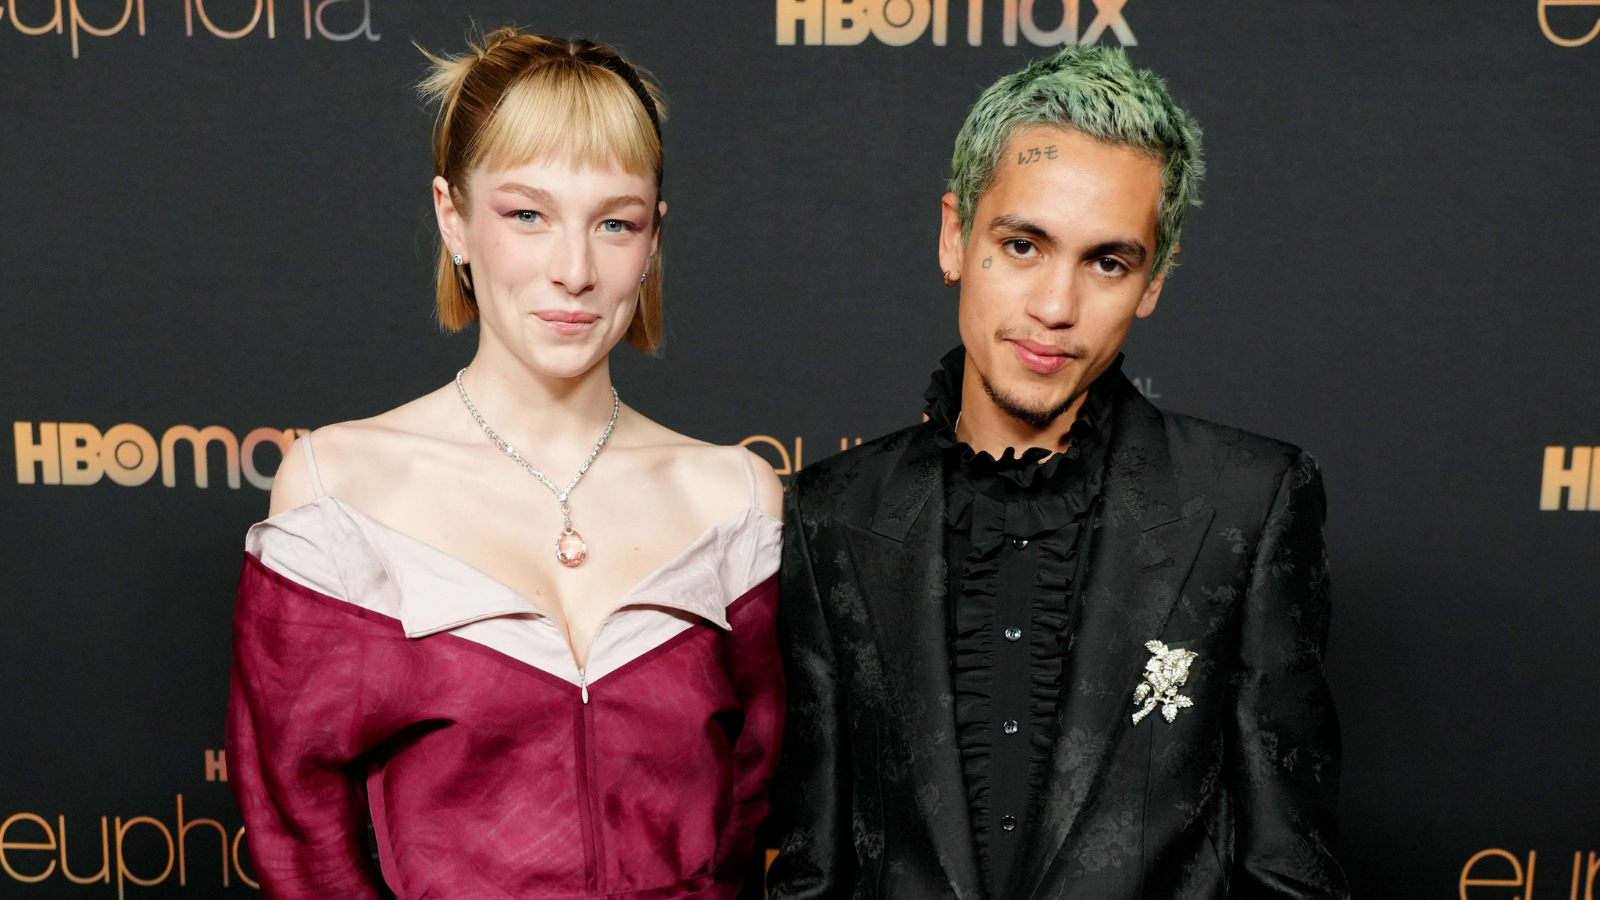 'Euphoria's' Hunter Schafer And Dominic Fike Officially Confirms Their Relationship On Instagram